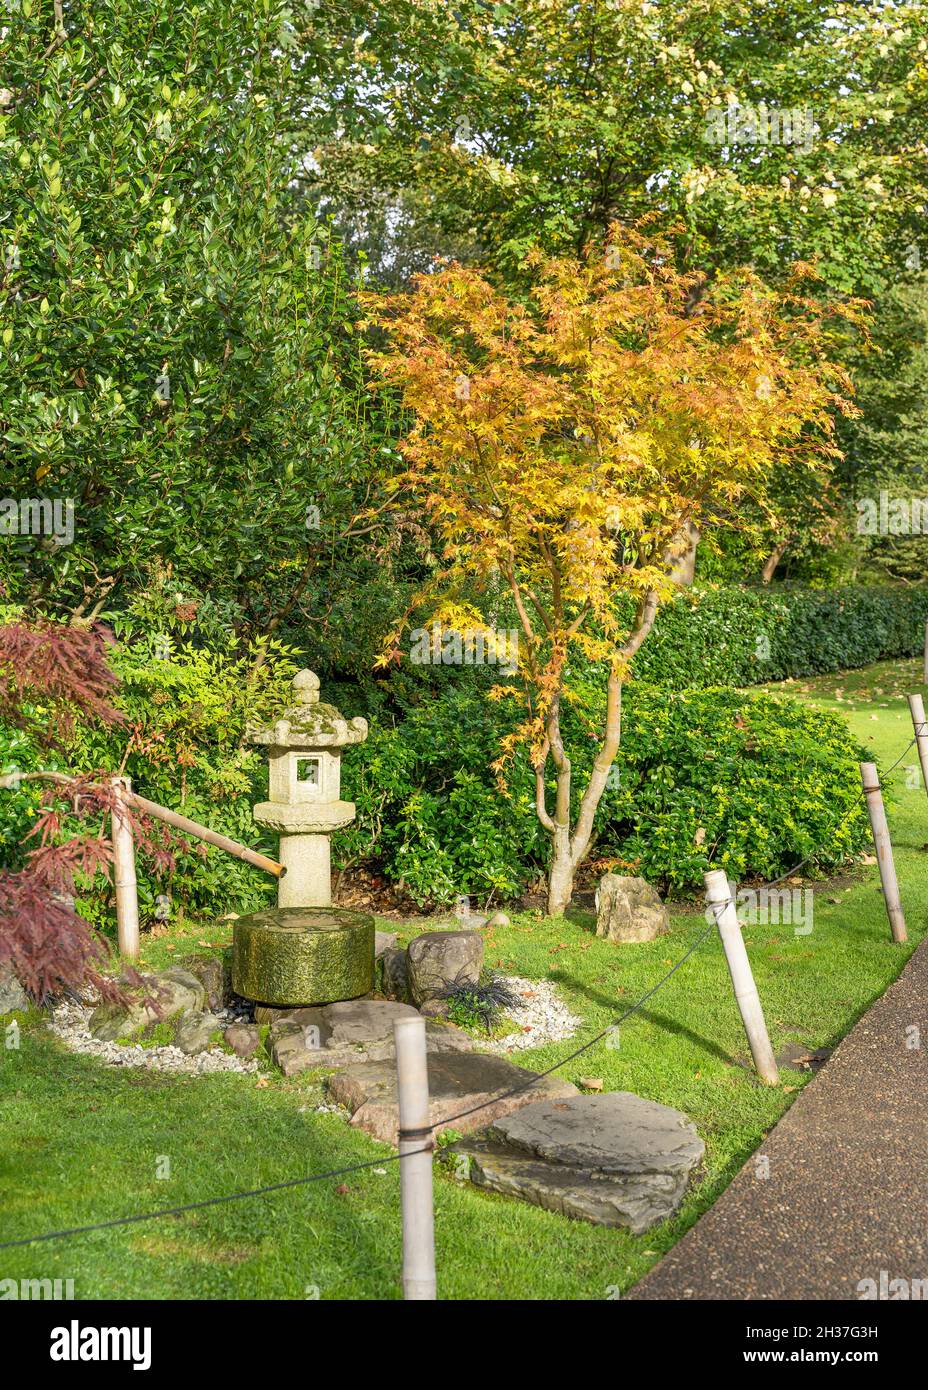 Japanese themed garden with a lucky coin fountain and oriental stone lantern. Surrounded by the autumn colours of the trees. Stock Photo